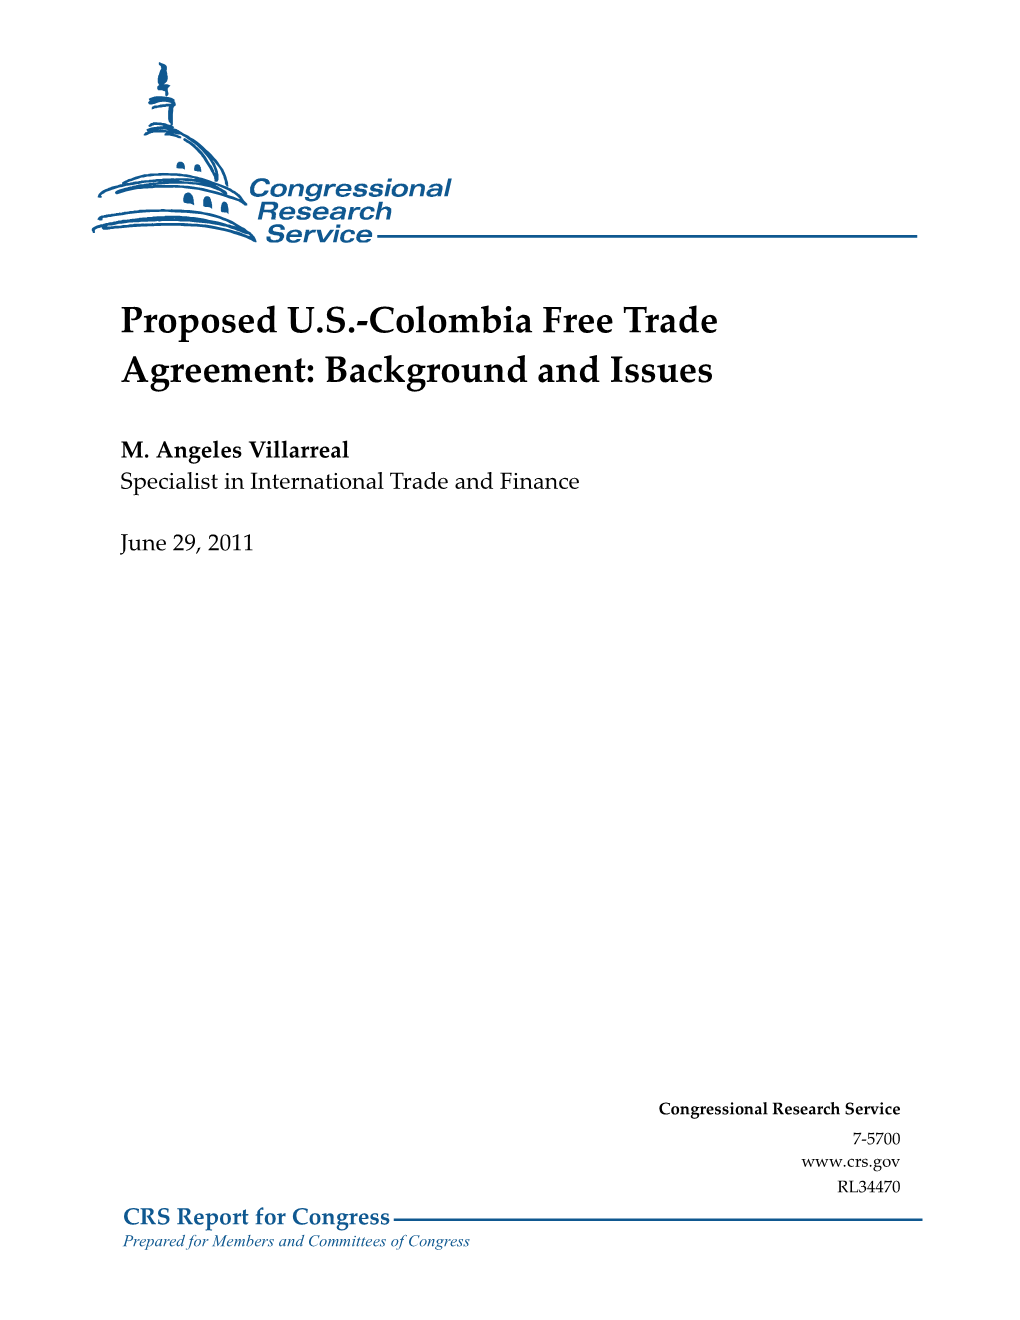 Proposed US-Colombia Free Trade Agreement